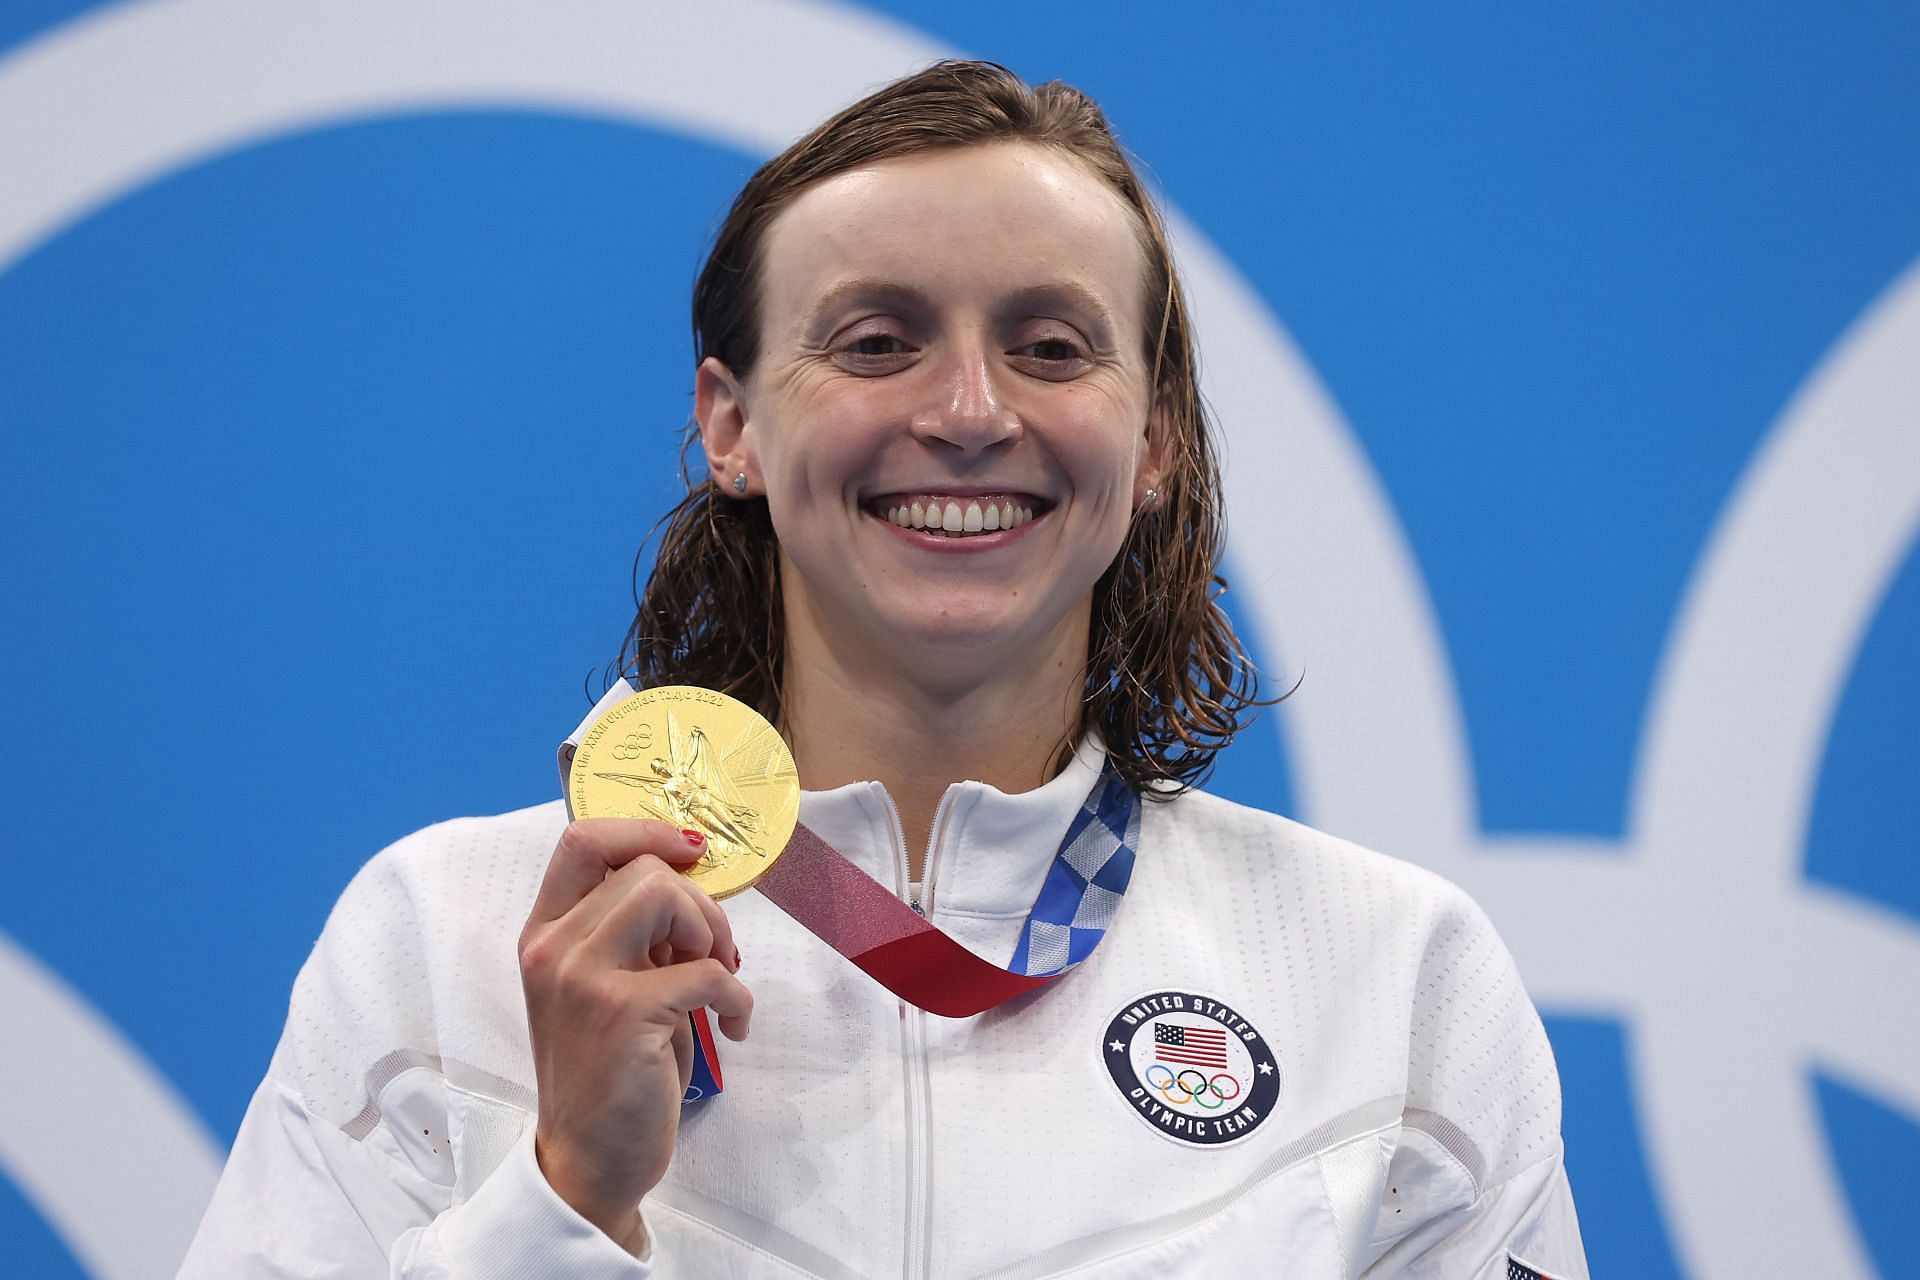 Katie Ledecky of Team United States poses during the Women&rsquo;s 800m Freestyle Final medal ceremony at Tokyo Aquatics Centre in Tokyo, Japan.